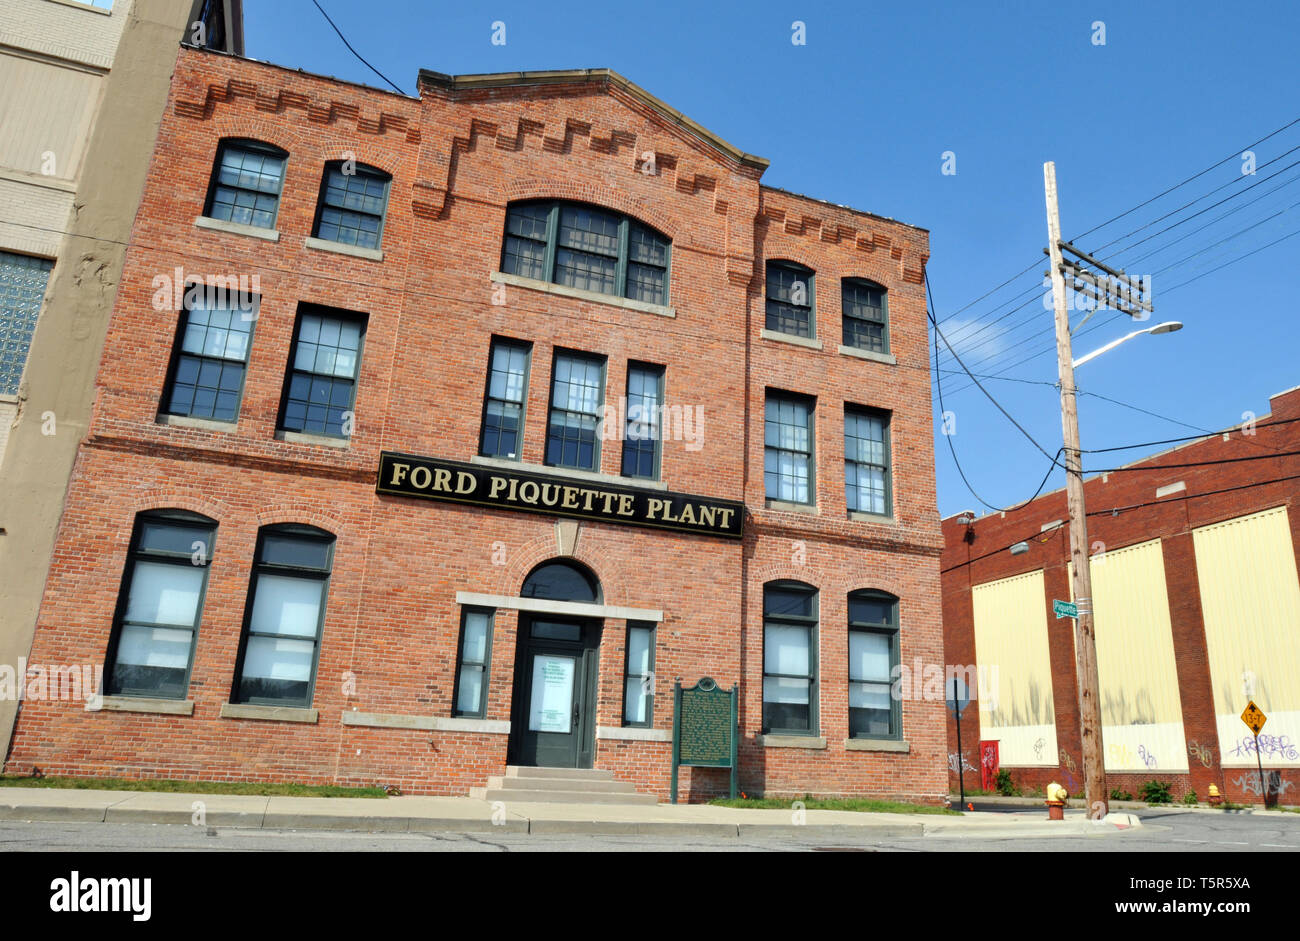 The Ford Piquette Avenue Plant in Detroit, Michigan, was the birthplace of the Model T automobile. Built in 1904, the historic site is now a museum. Stock Photo